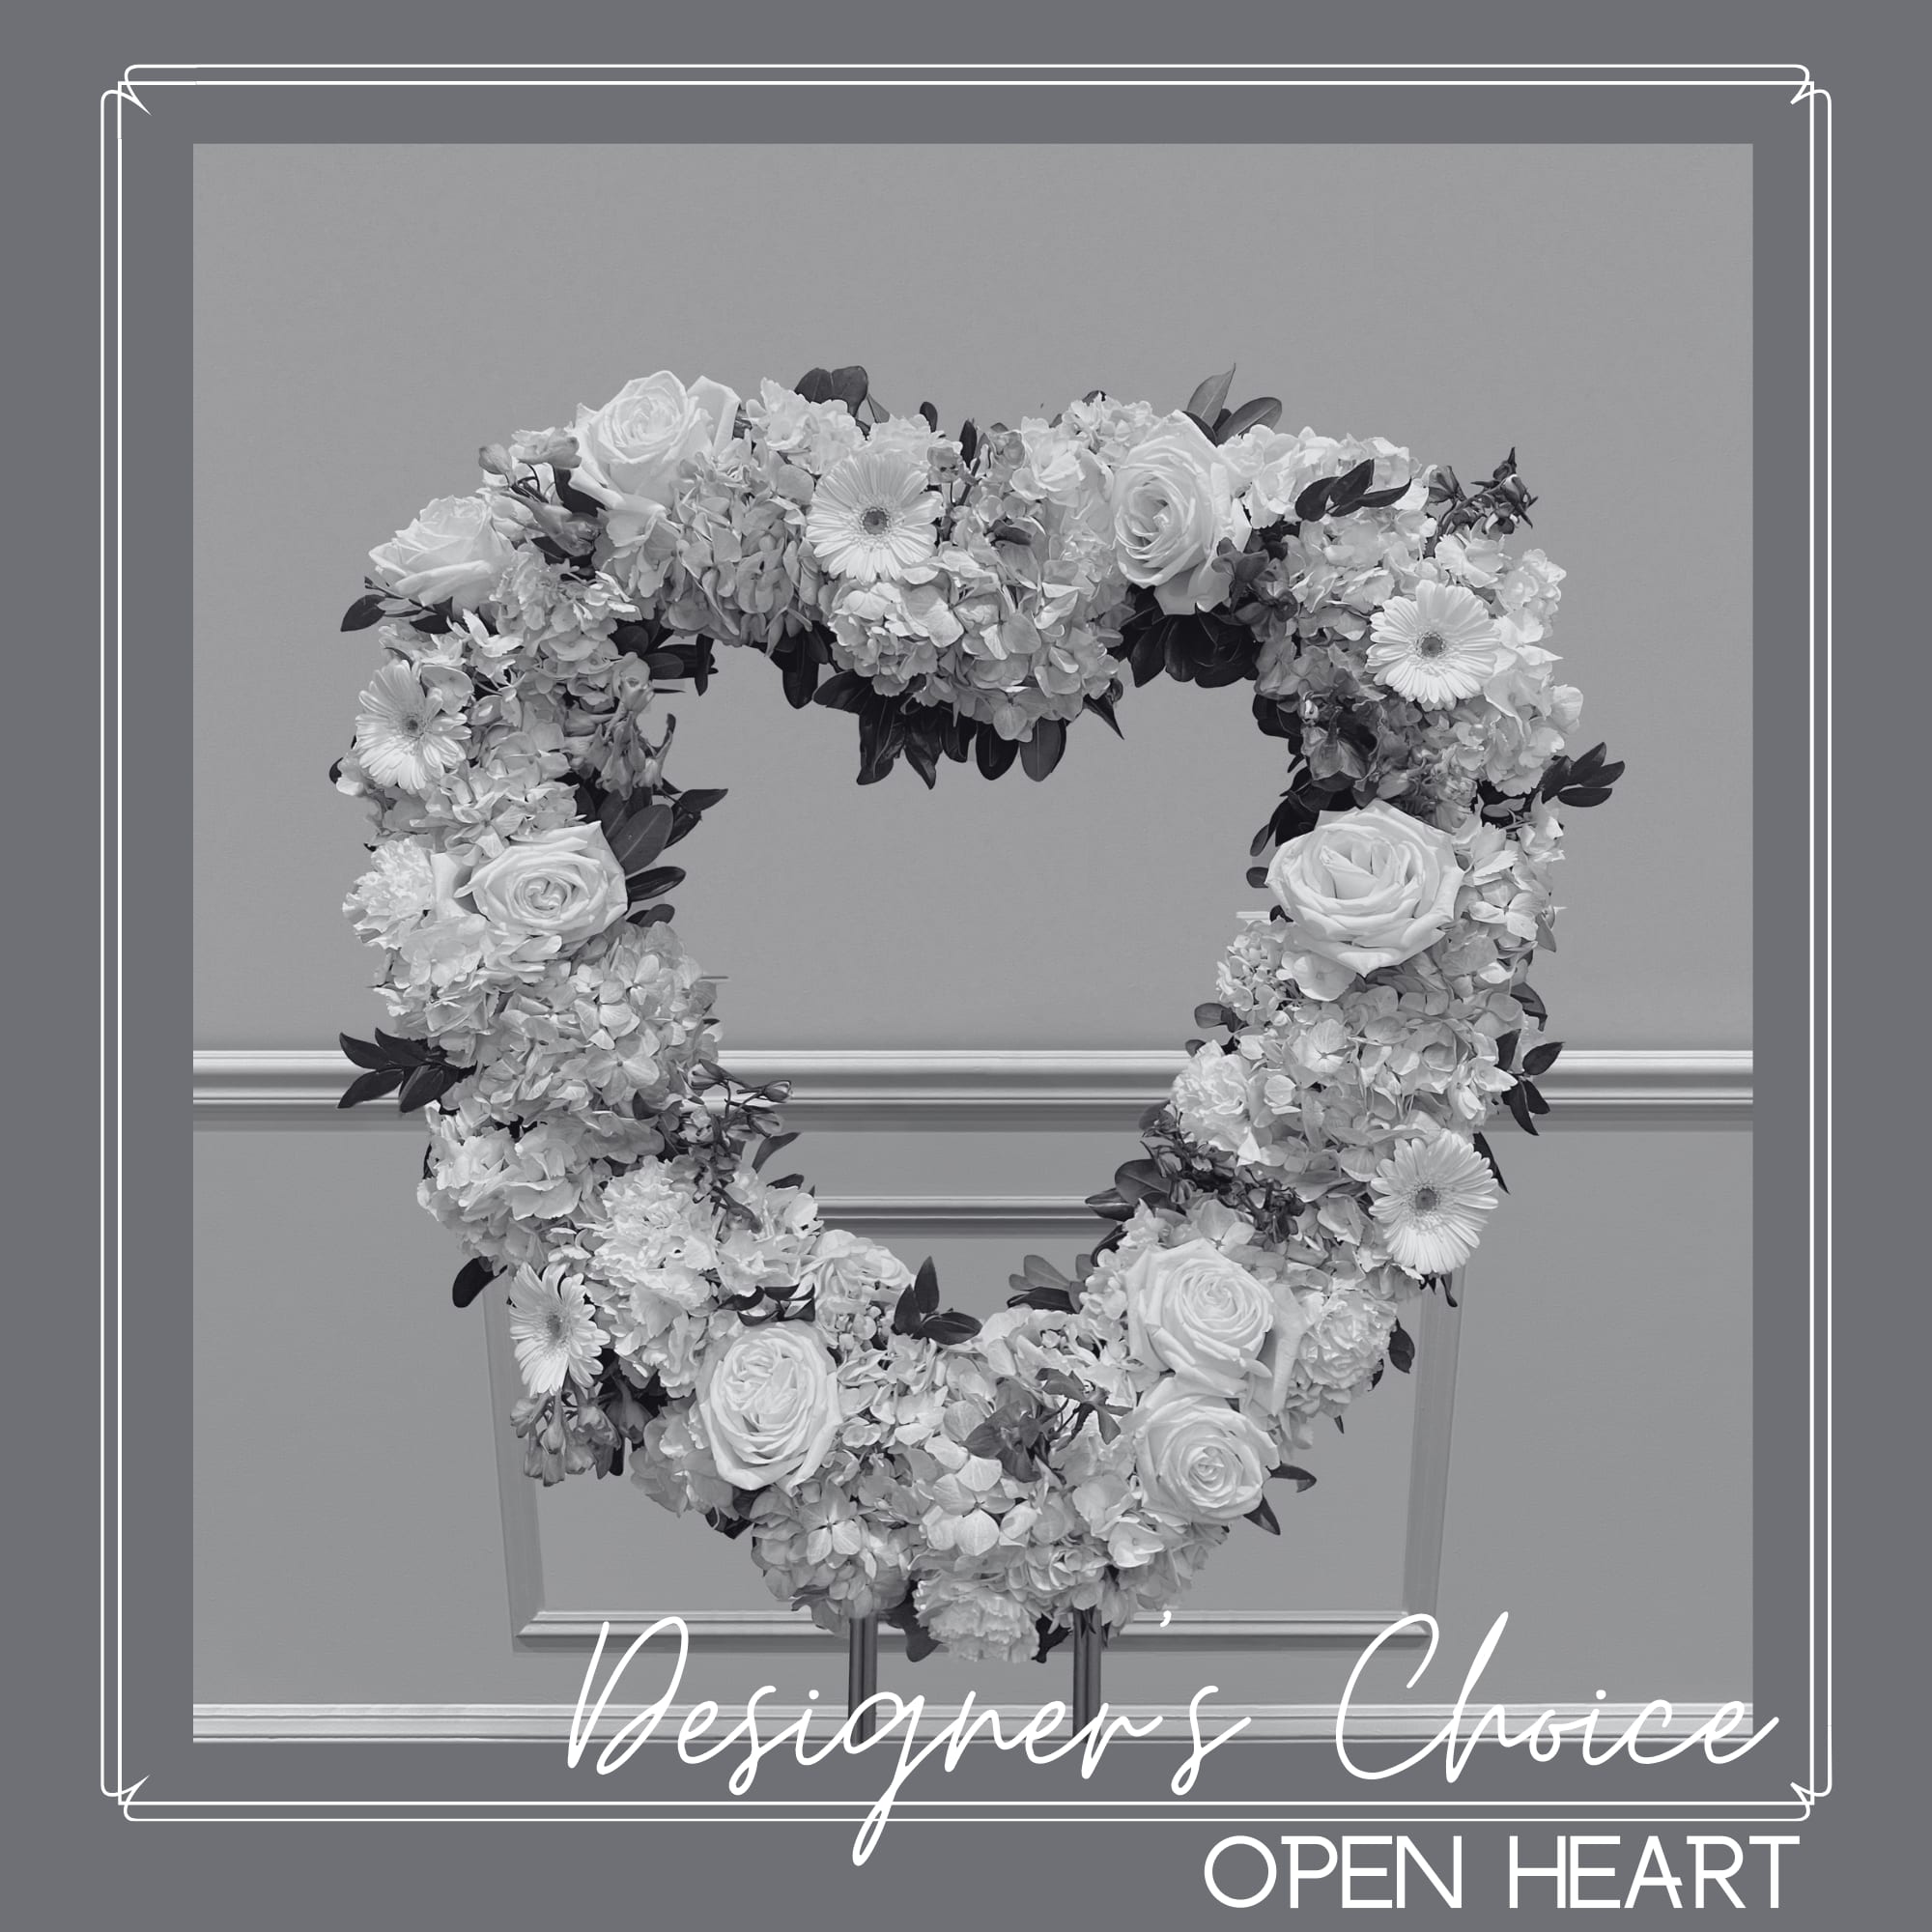 Open Heart - Designer's Choice - Our designers will create a beautiful funeral heart to display on an easel which that would be appropriate a wake, memorial service or church setting.